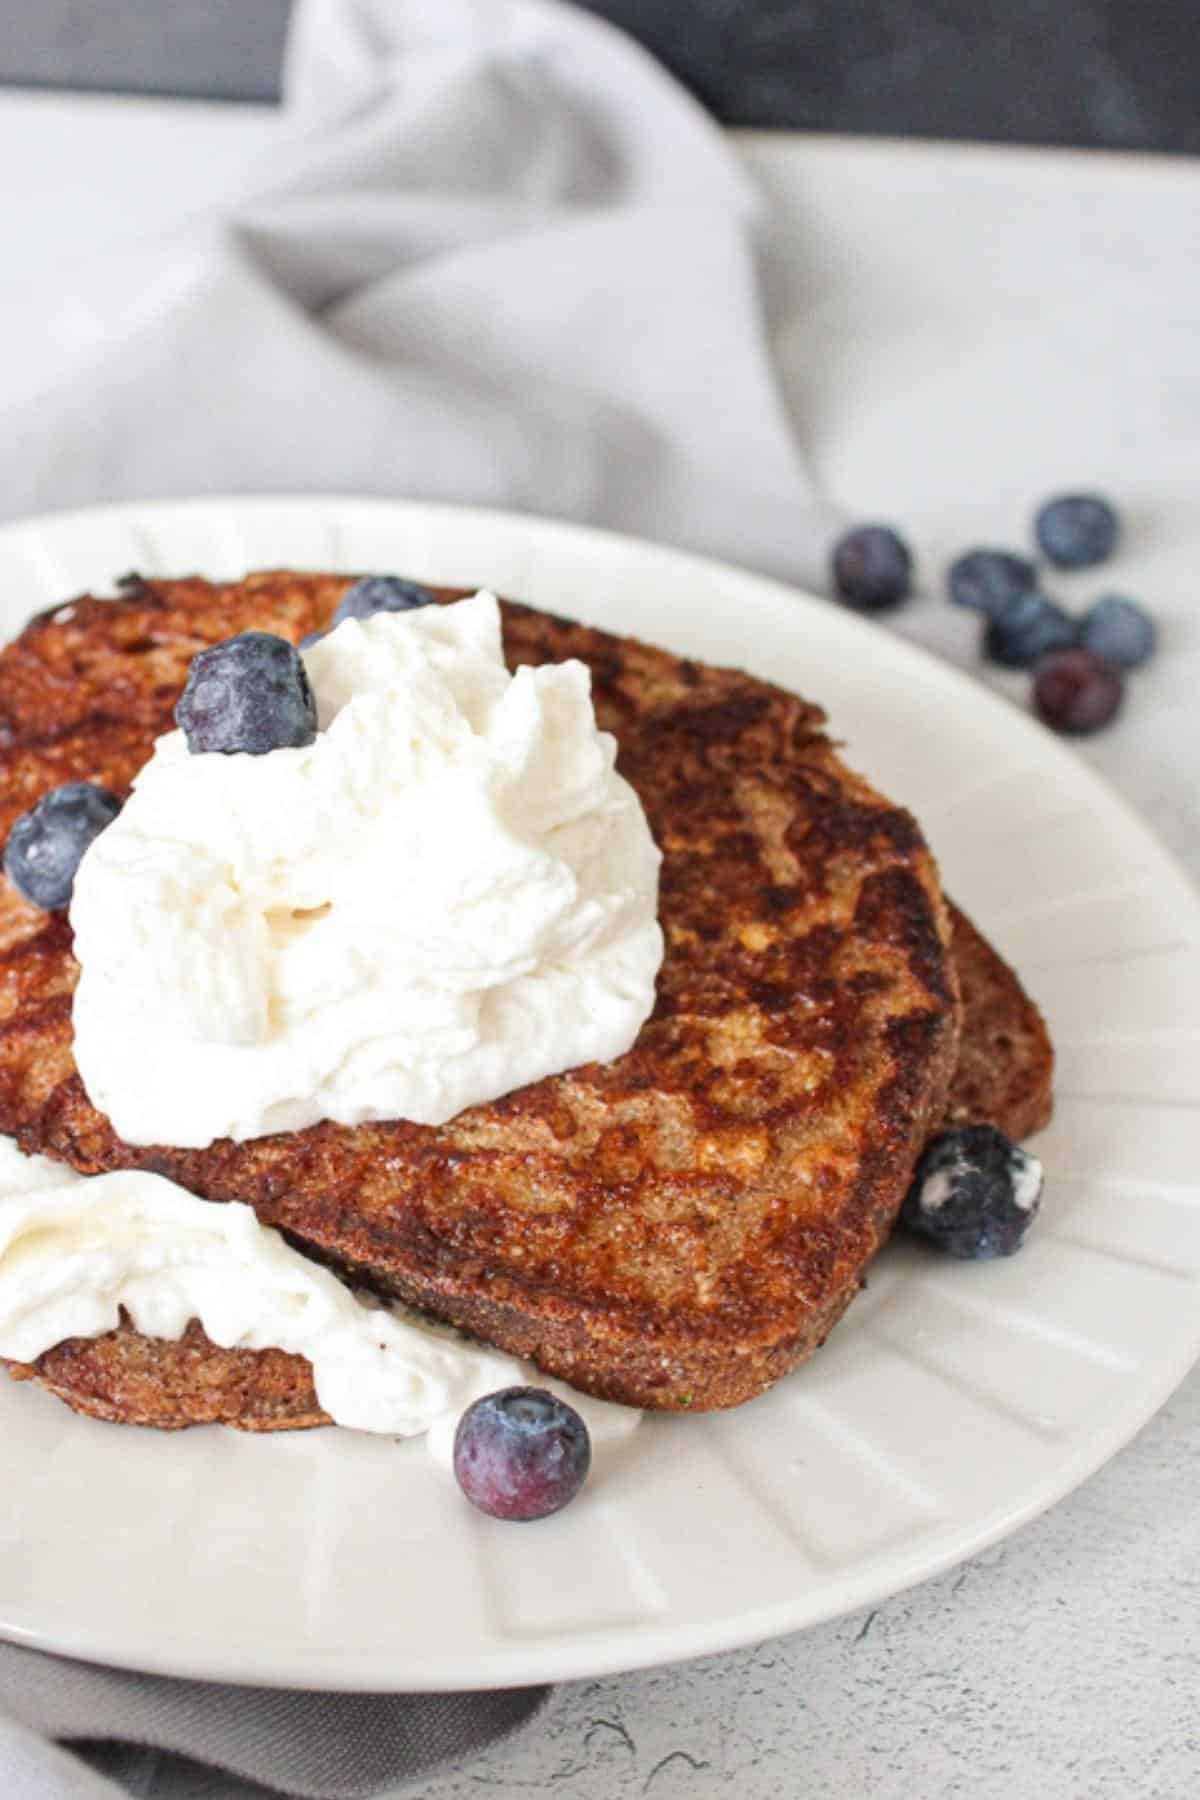 Vegan french toast with whipped cream and blueberries